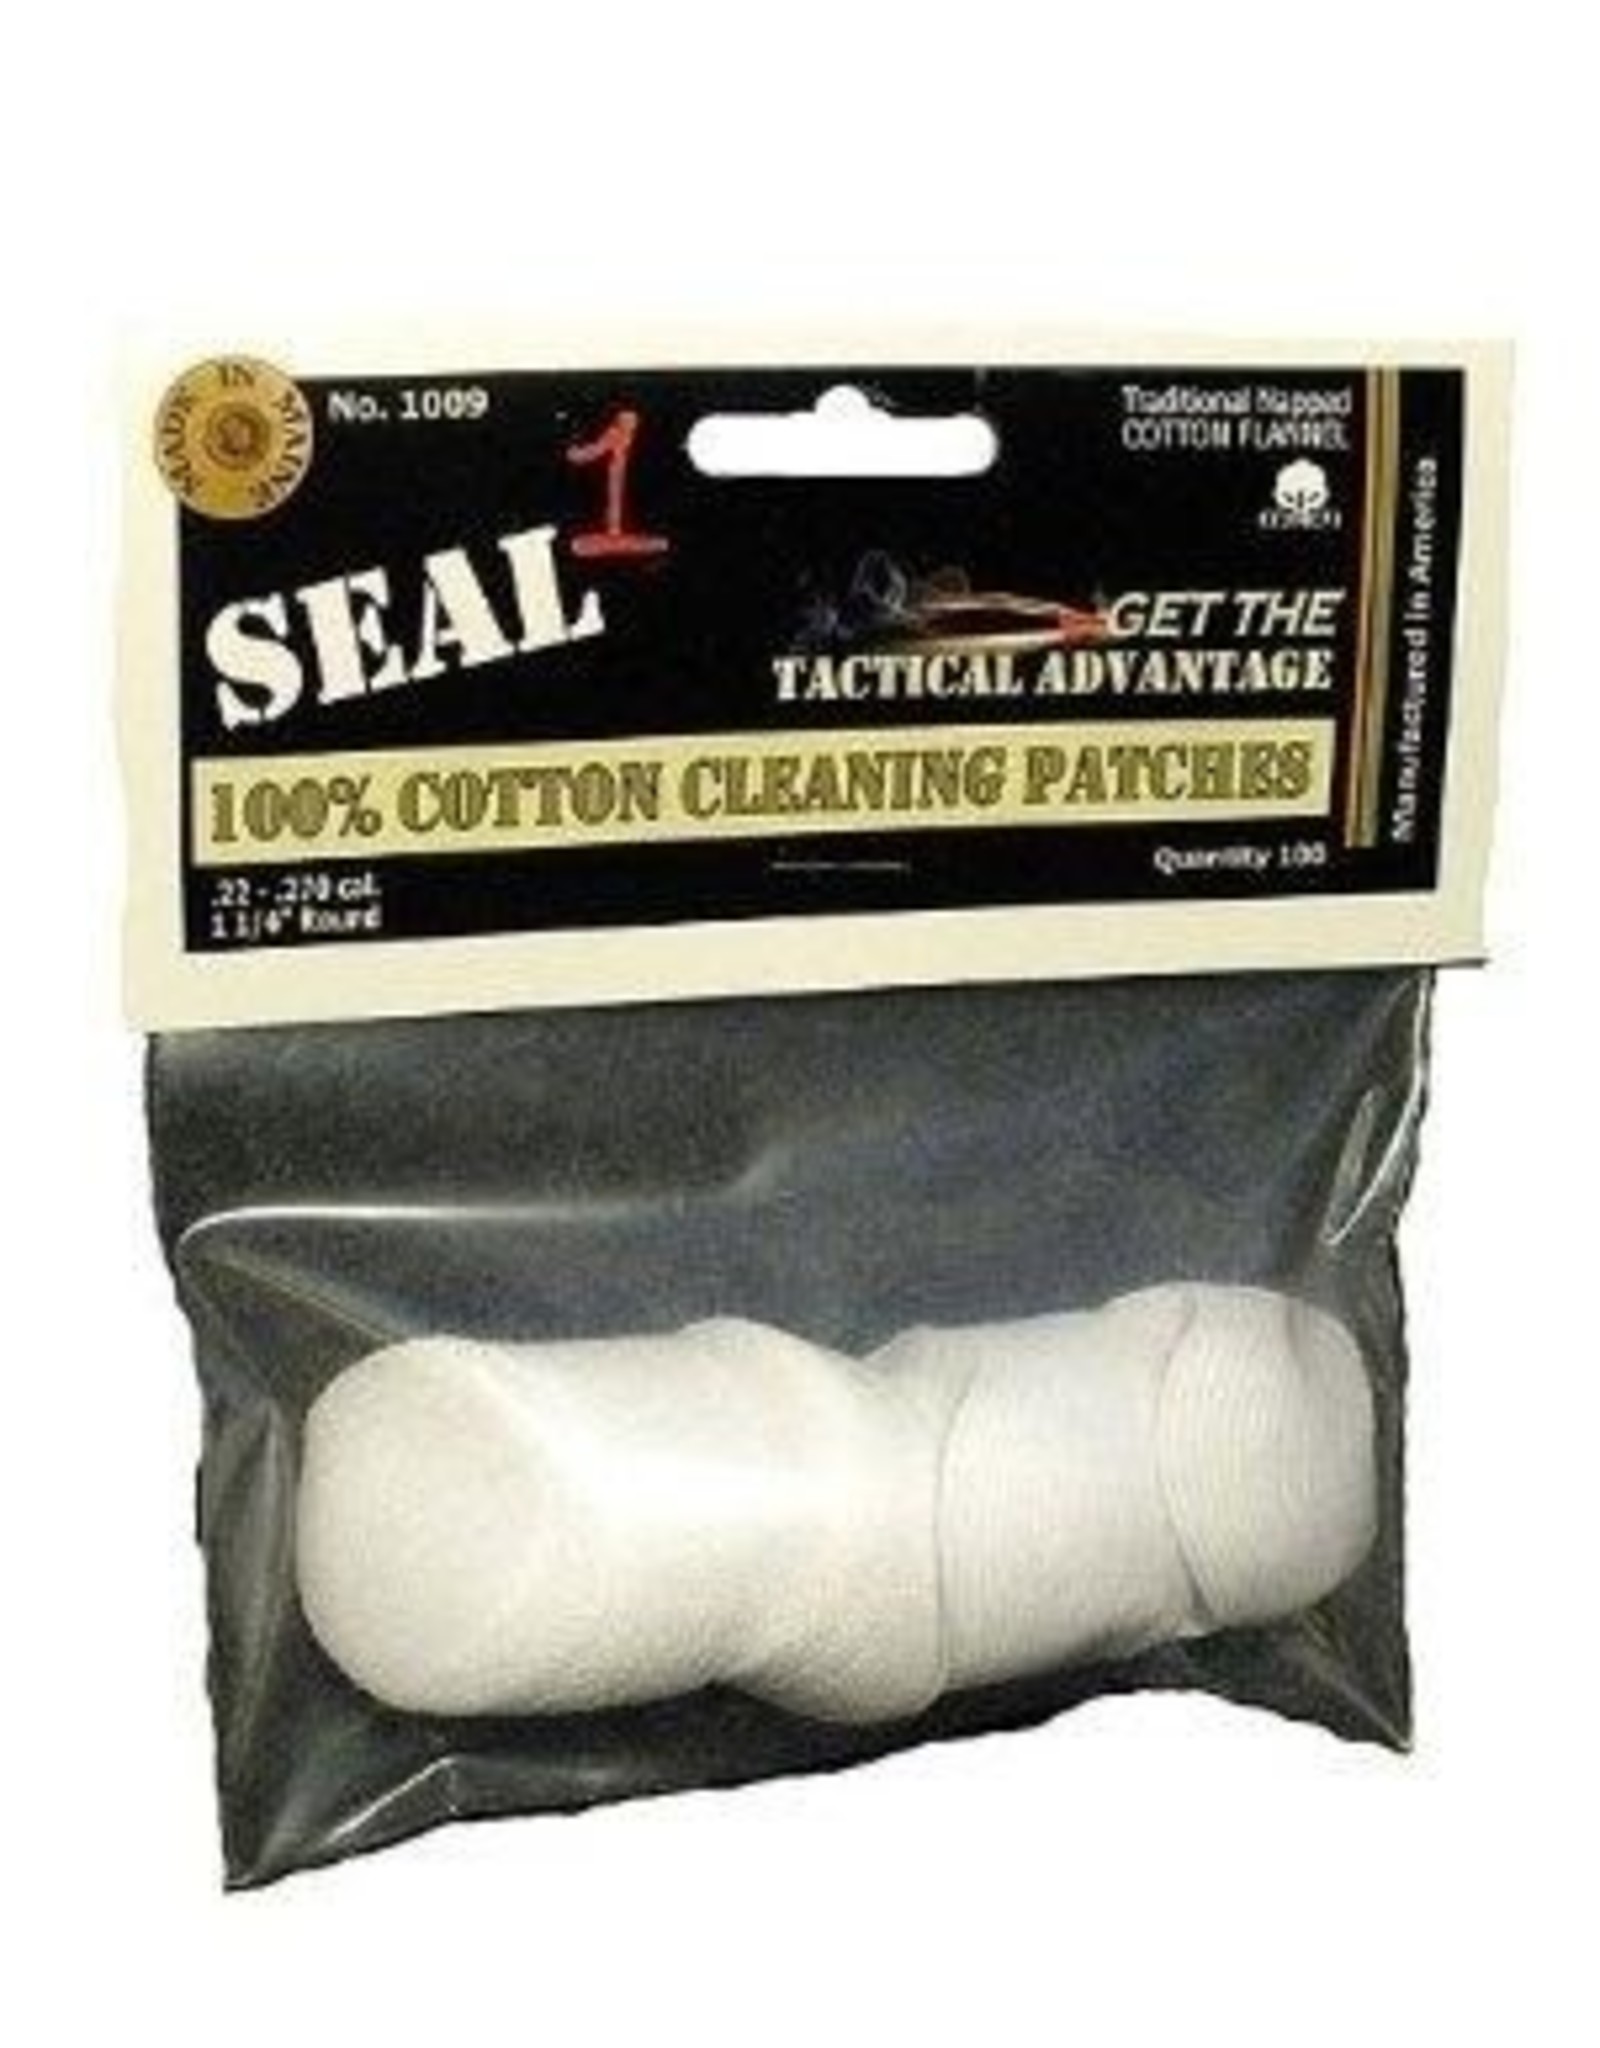 SEAL 1 Seal 1 100% Cotton Cleaning Patches .22-.270 cal 1 1/4 round